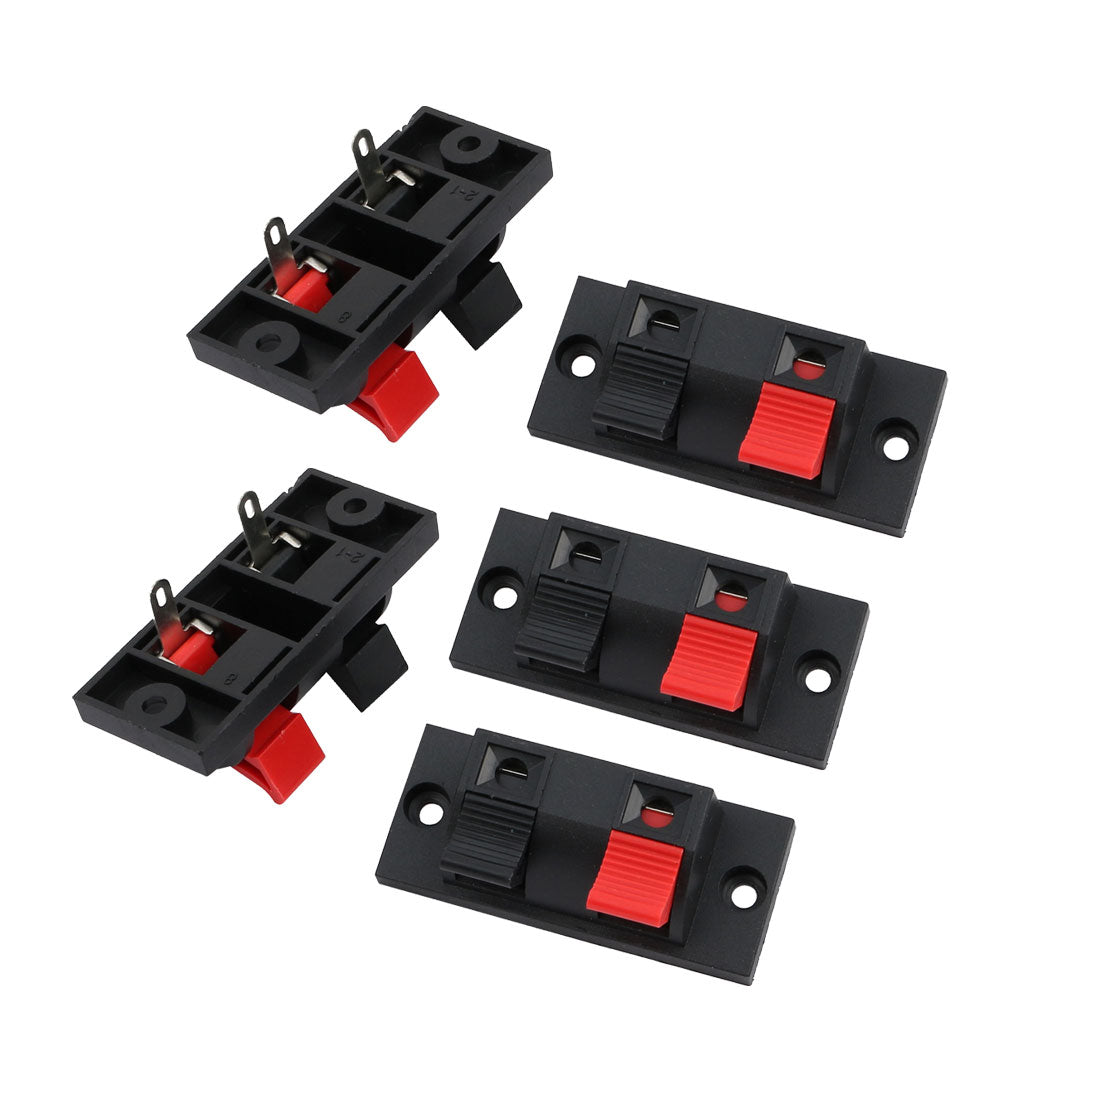 uxcell Uxcell 5PCS 2-Way Push Release Connector Plate Stereo Speaker Terminal Strip Block